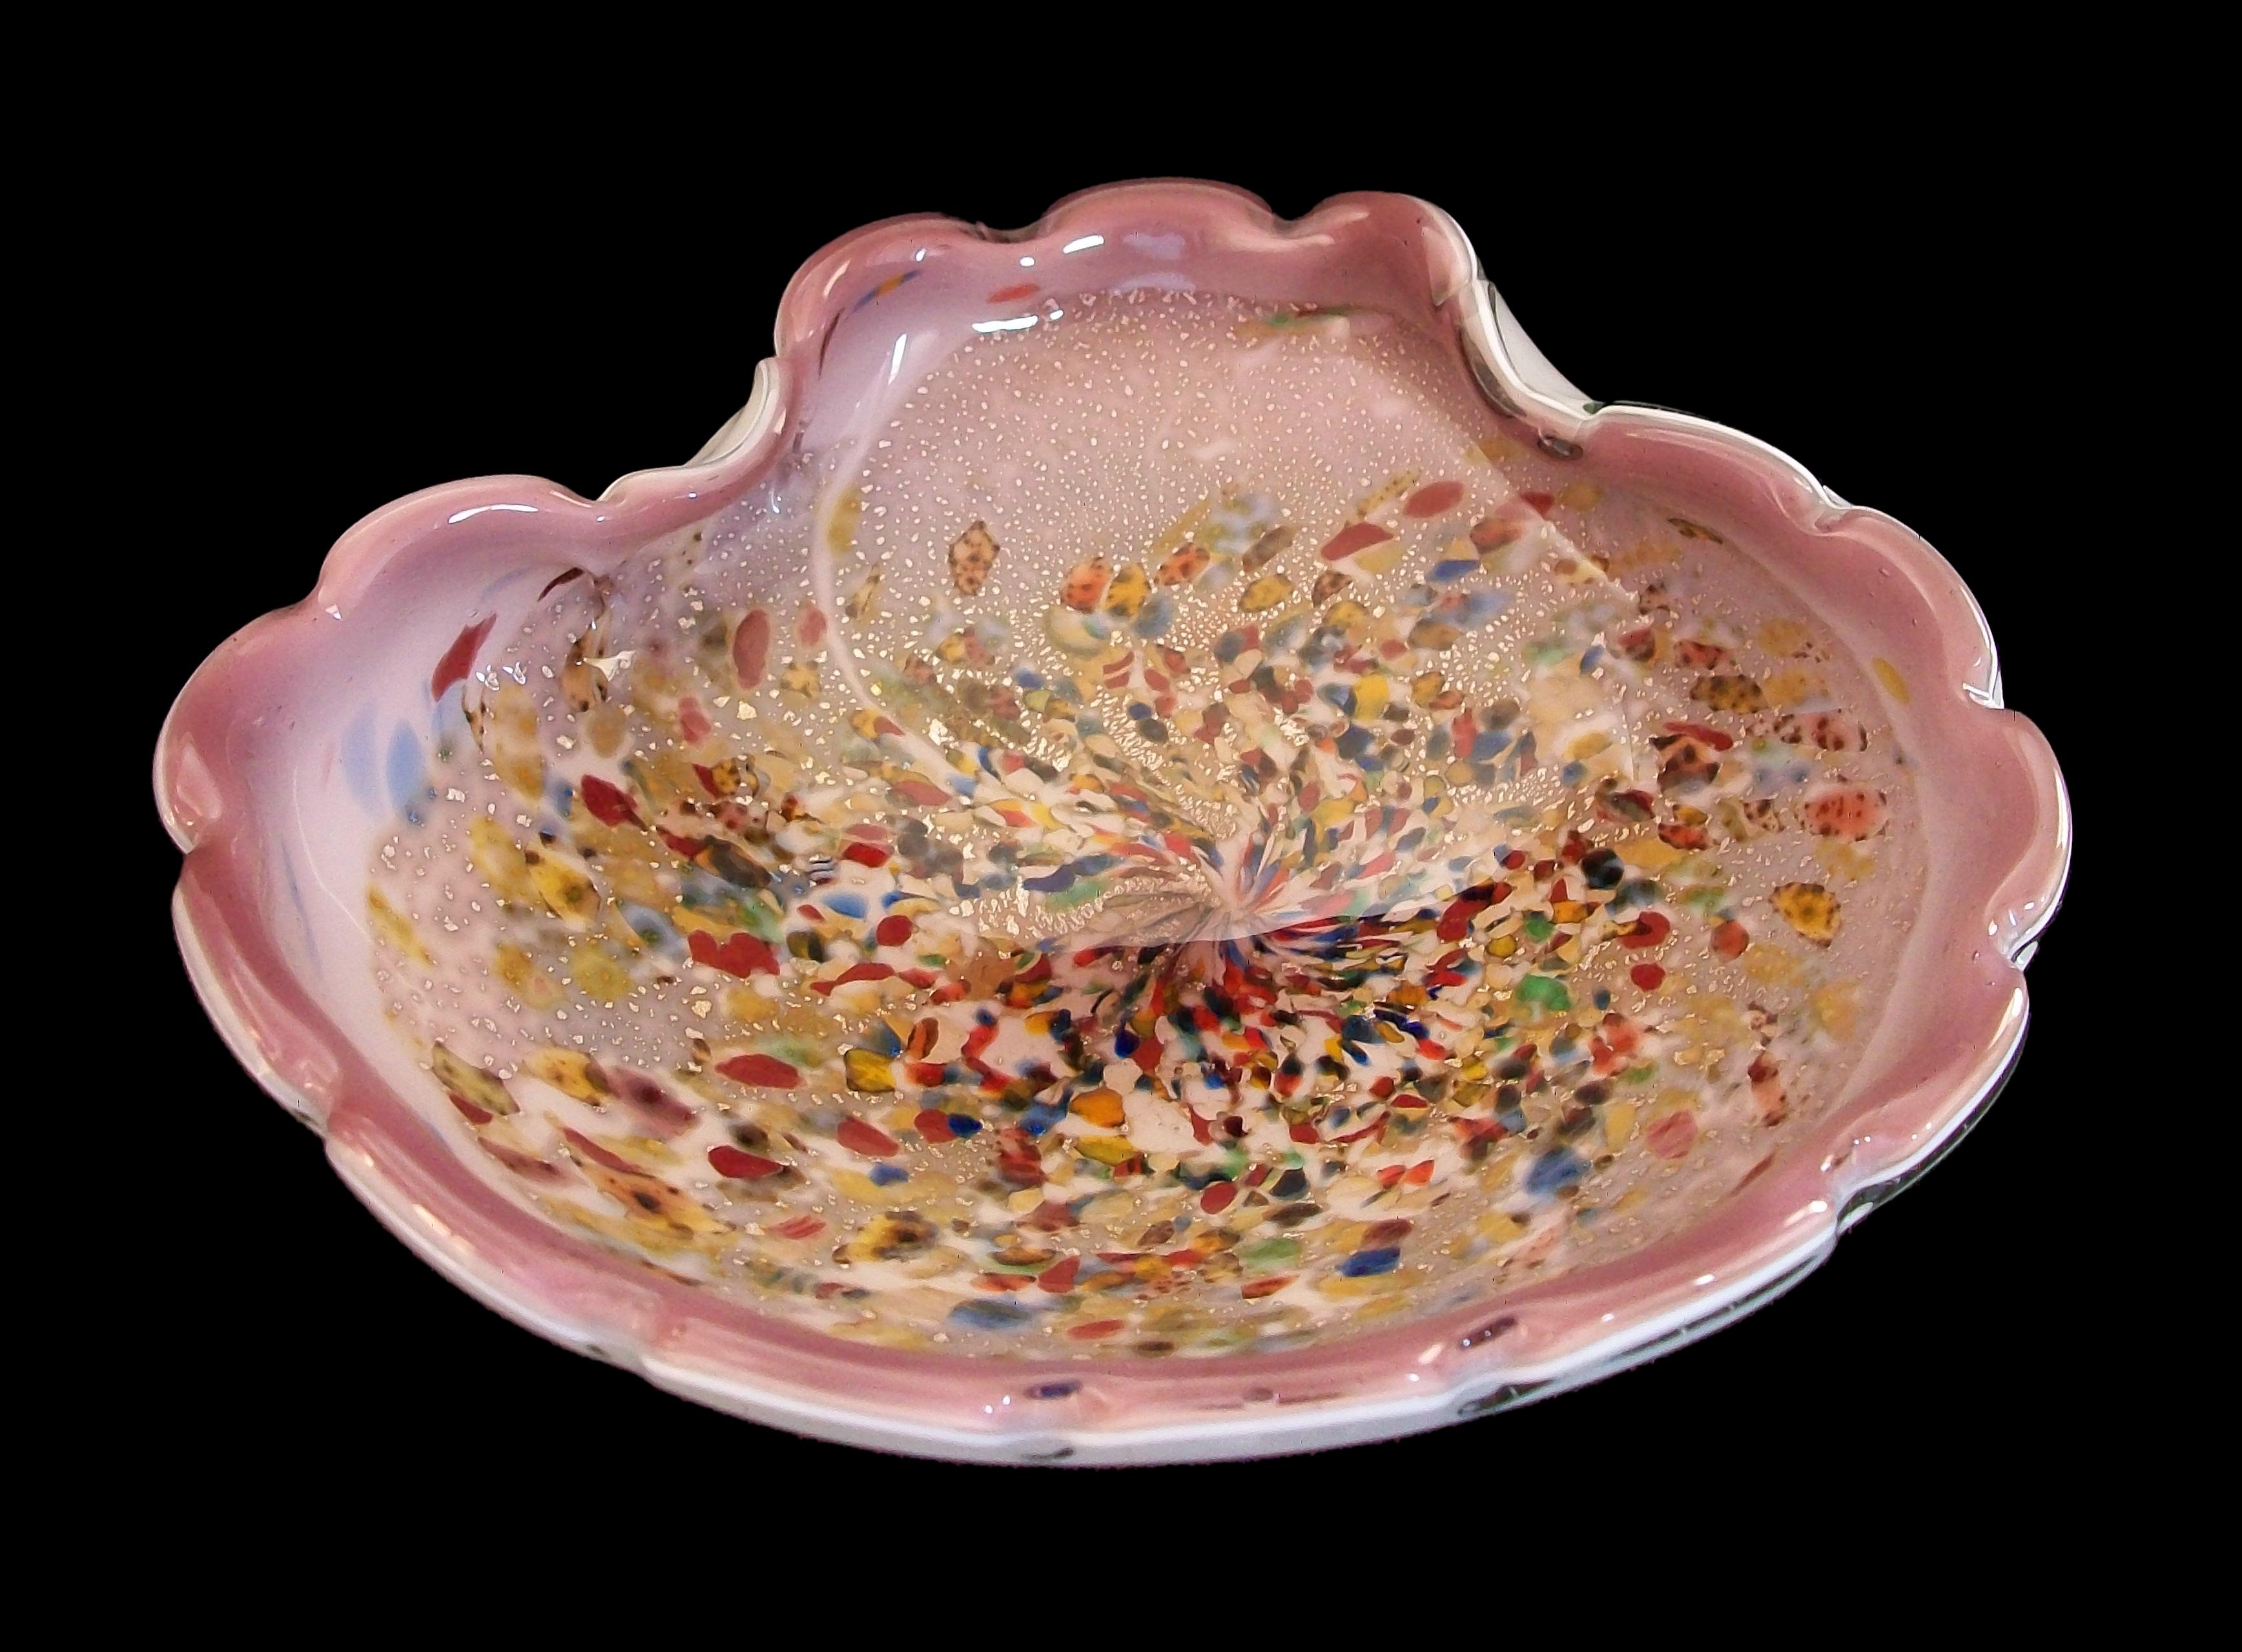 DINO MARTENS - AVEM - Mid Century Murano 'confetti' studio glass bowl with silver flecks - clam shell form - mouth blown with crimped edges - unsigned - Italy - mid 20th century.

Excellent vintage condition - no loss - no damage - no restoration